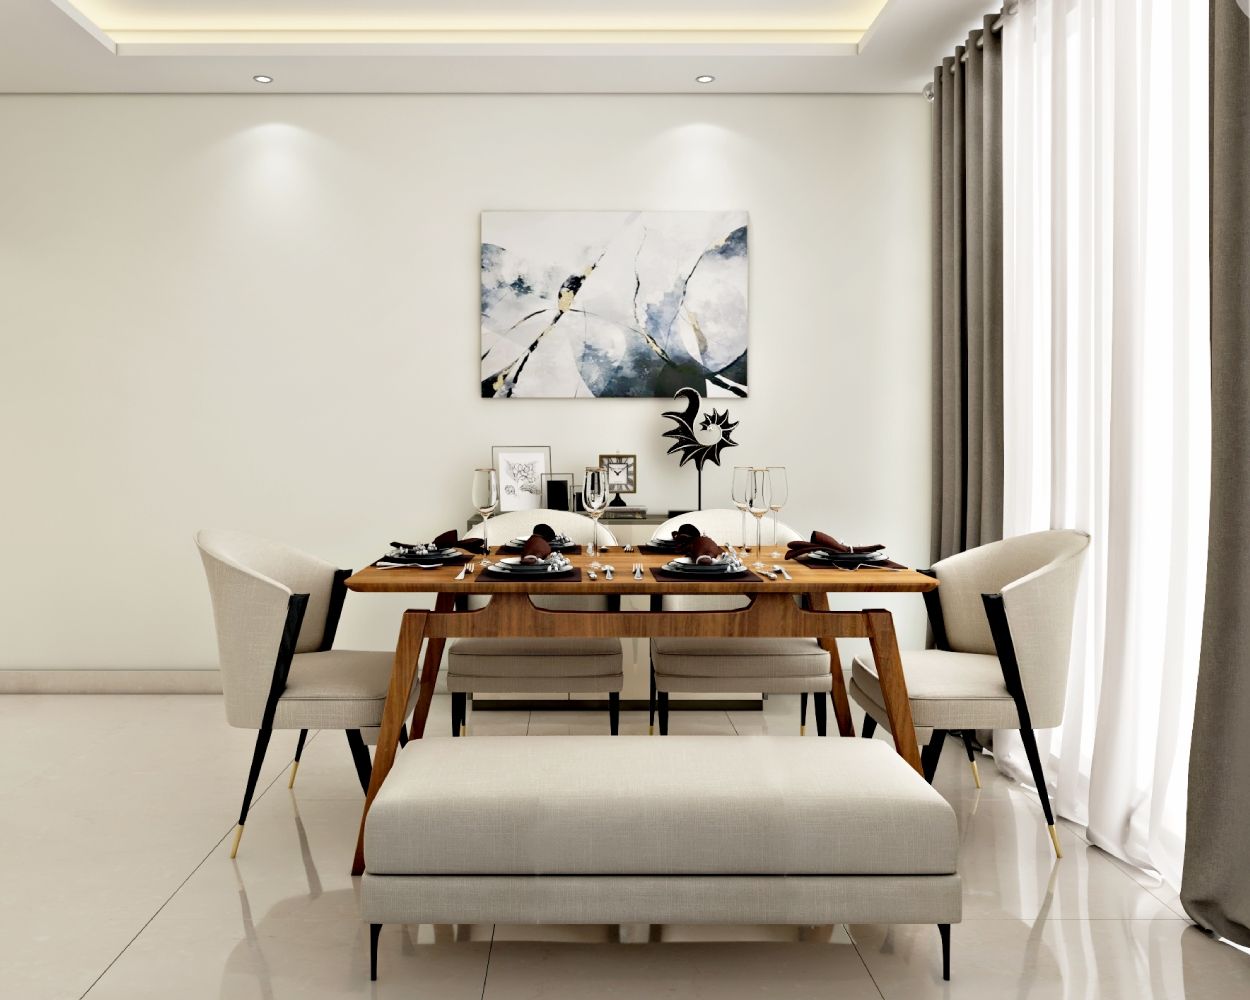 Minimal Beige And Wood 4-Seater Dining Room Design With Plush Seater